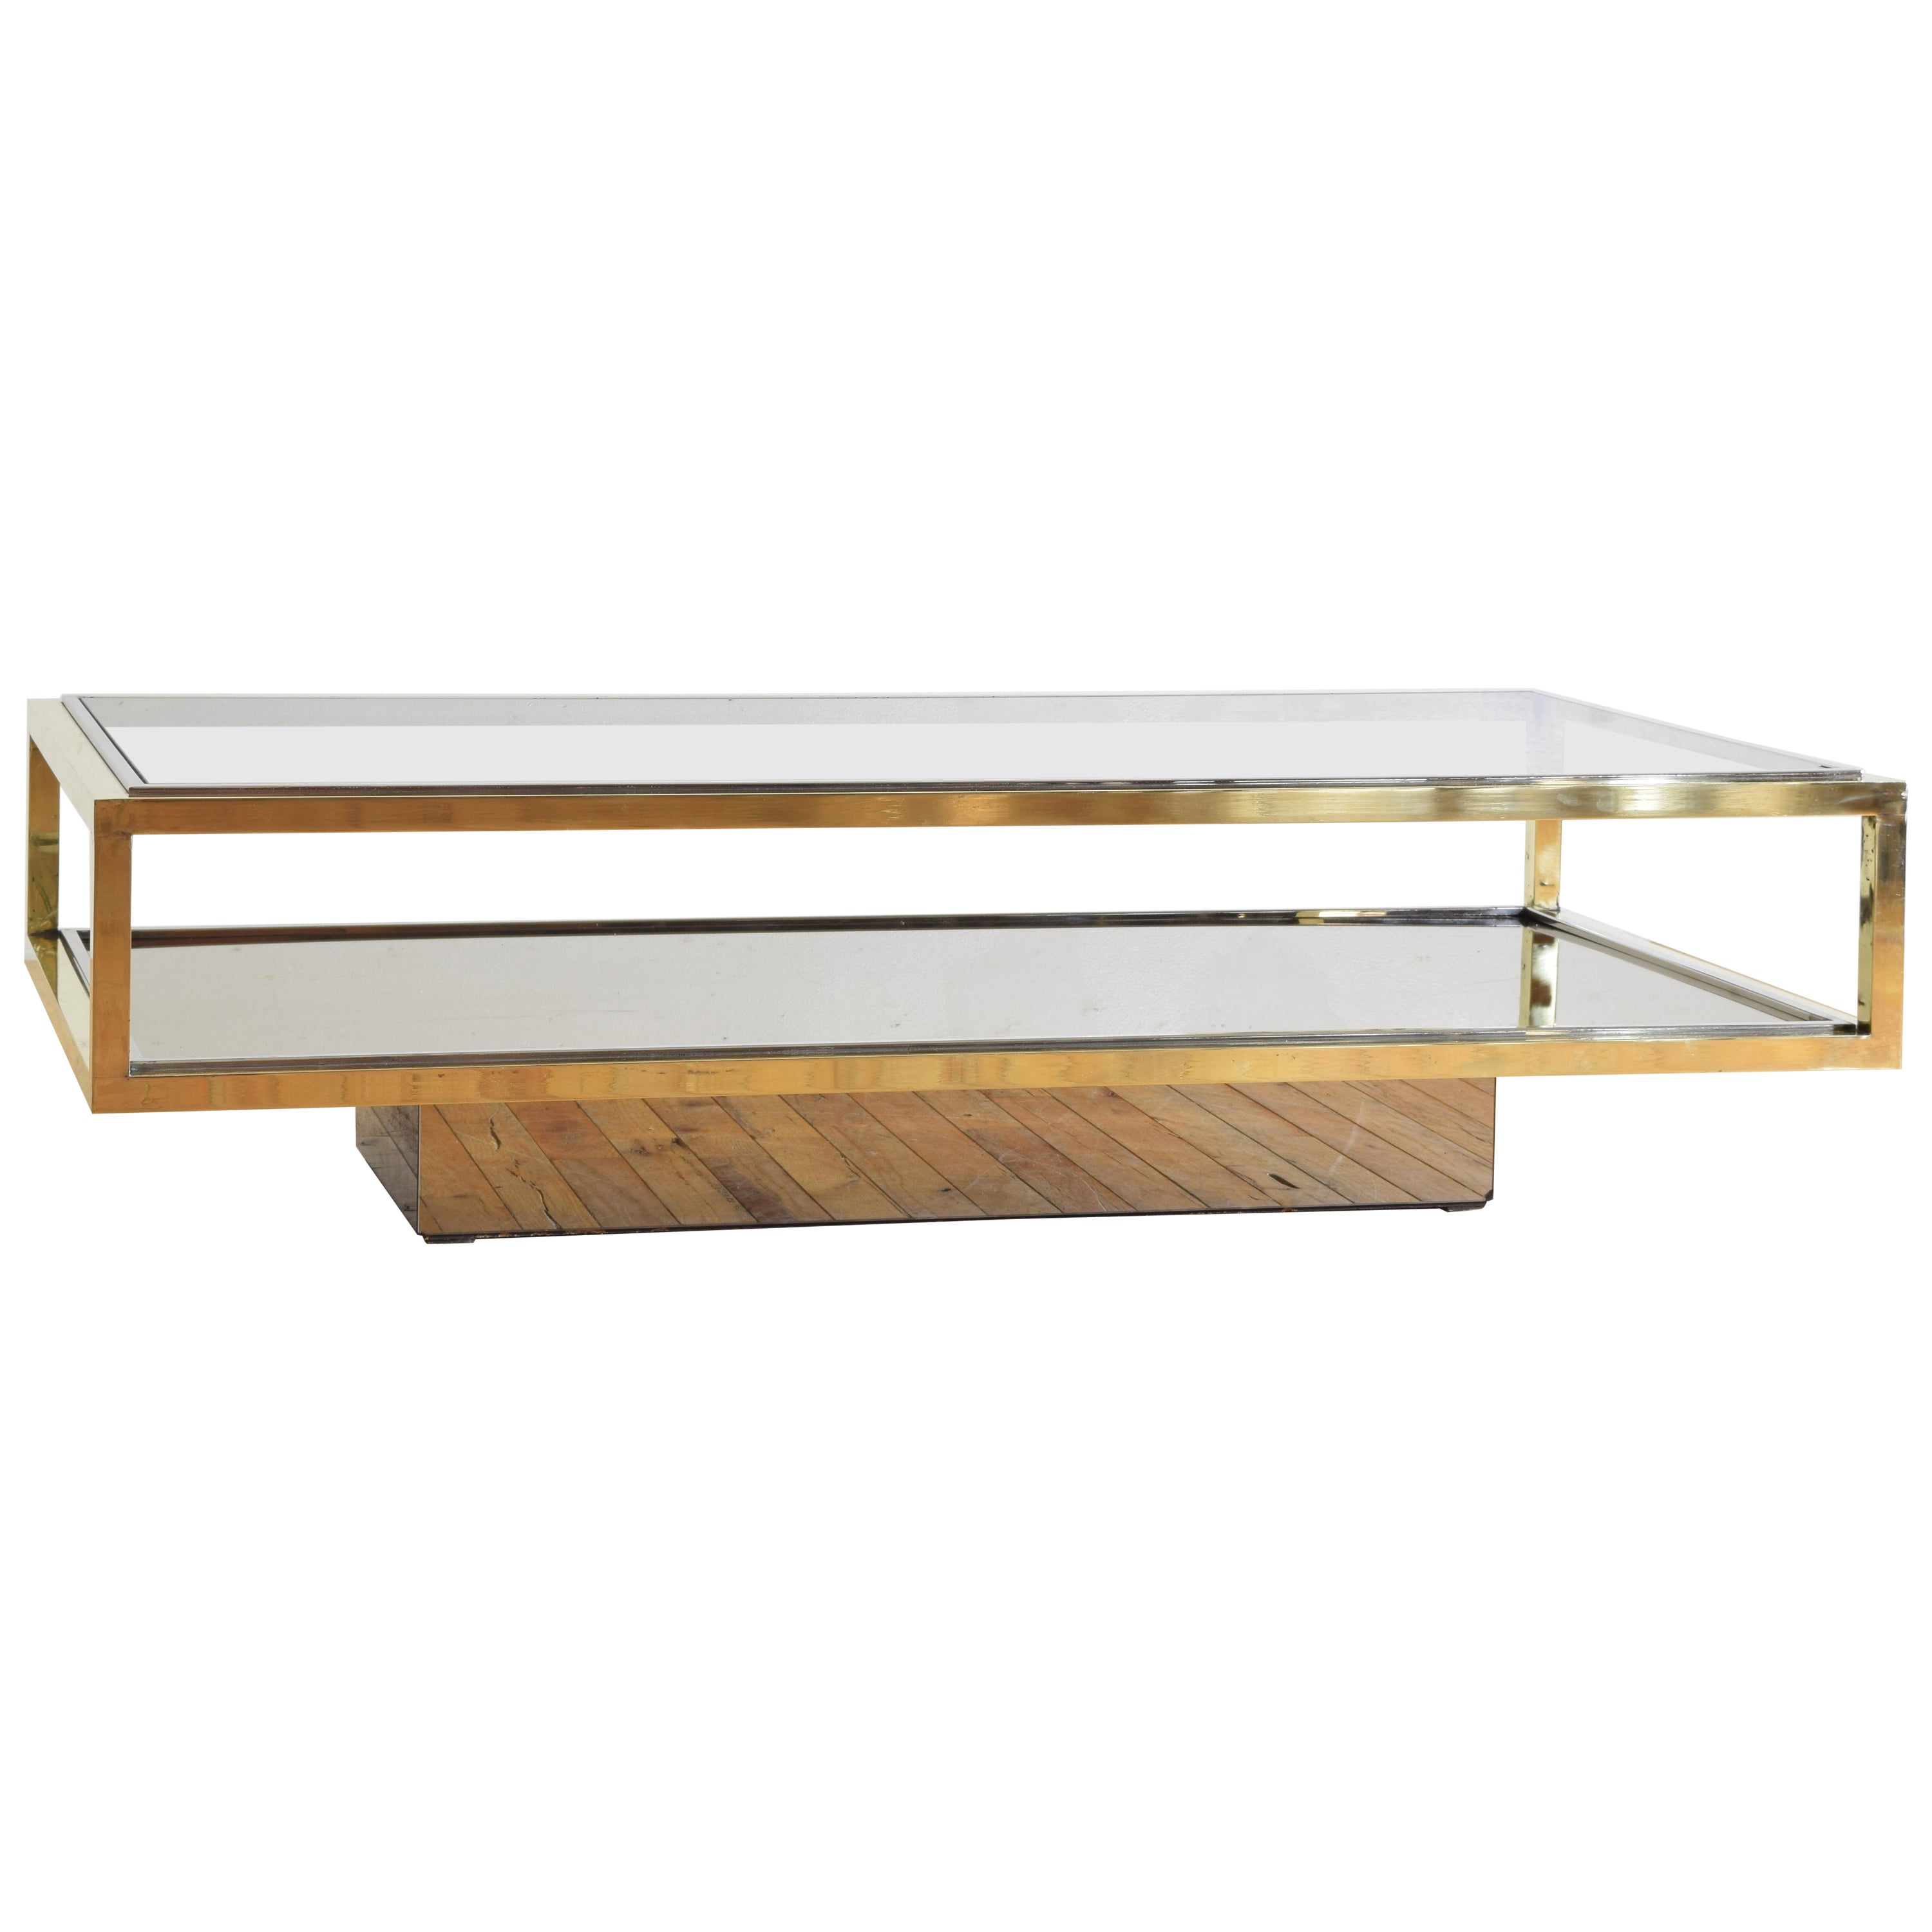 Italian Brass, Chrome, Mirrored, & Glass Coffee Table, likely 1970’s